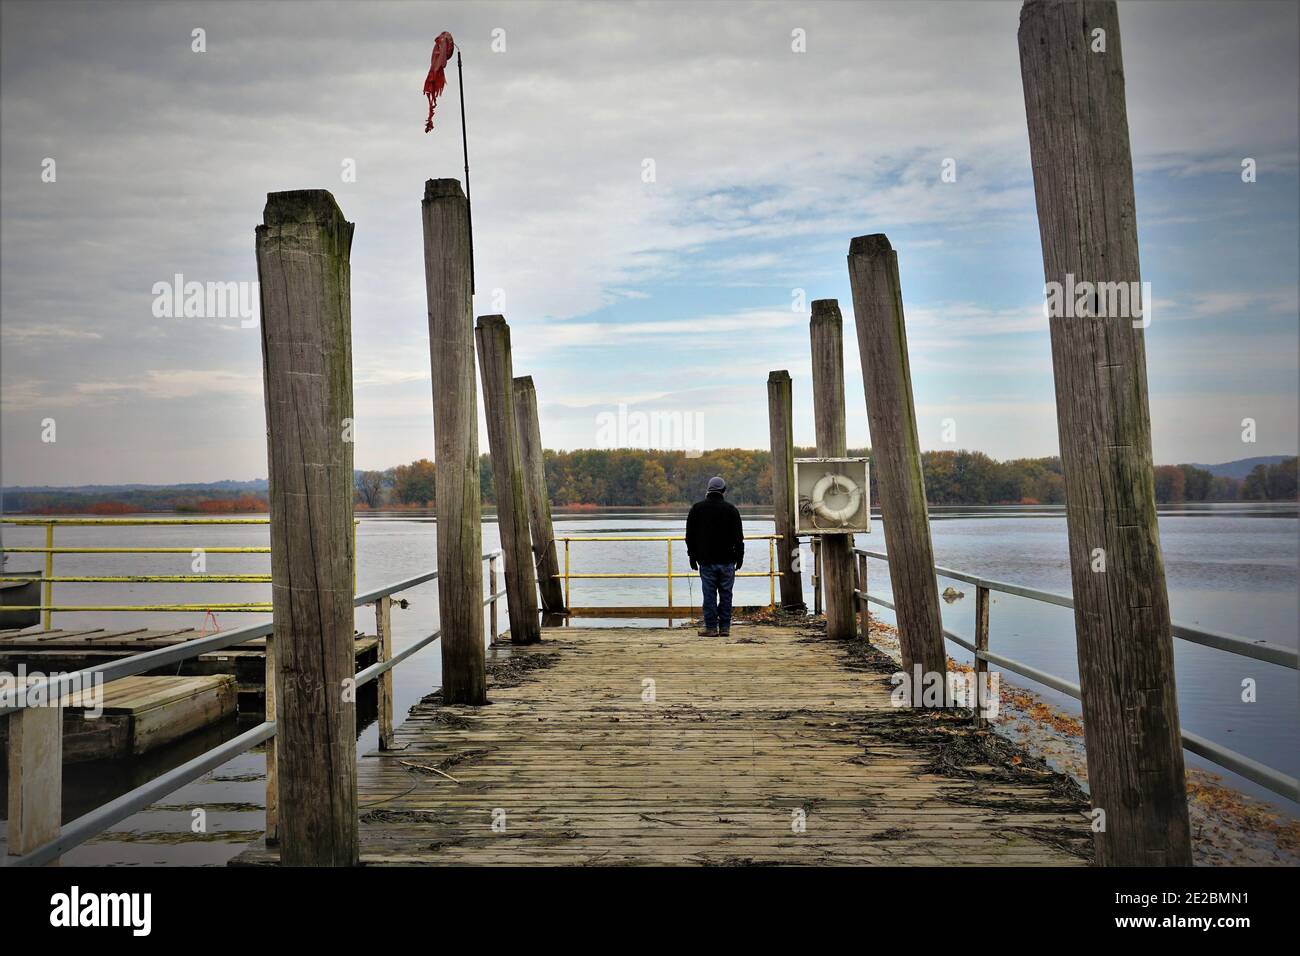 Man on a Mississippi River dock Stock Photo